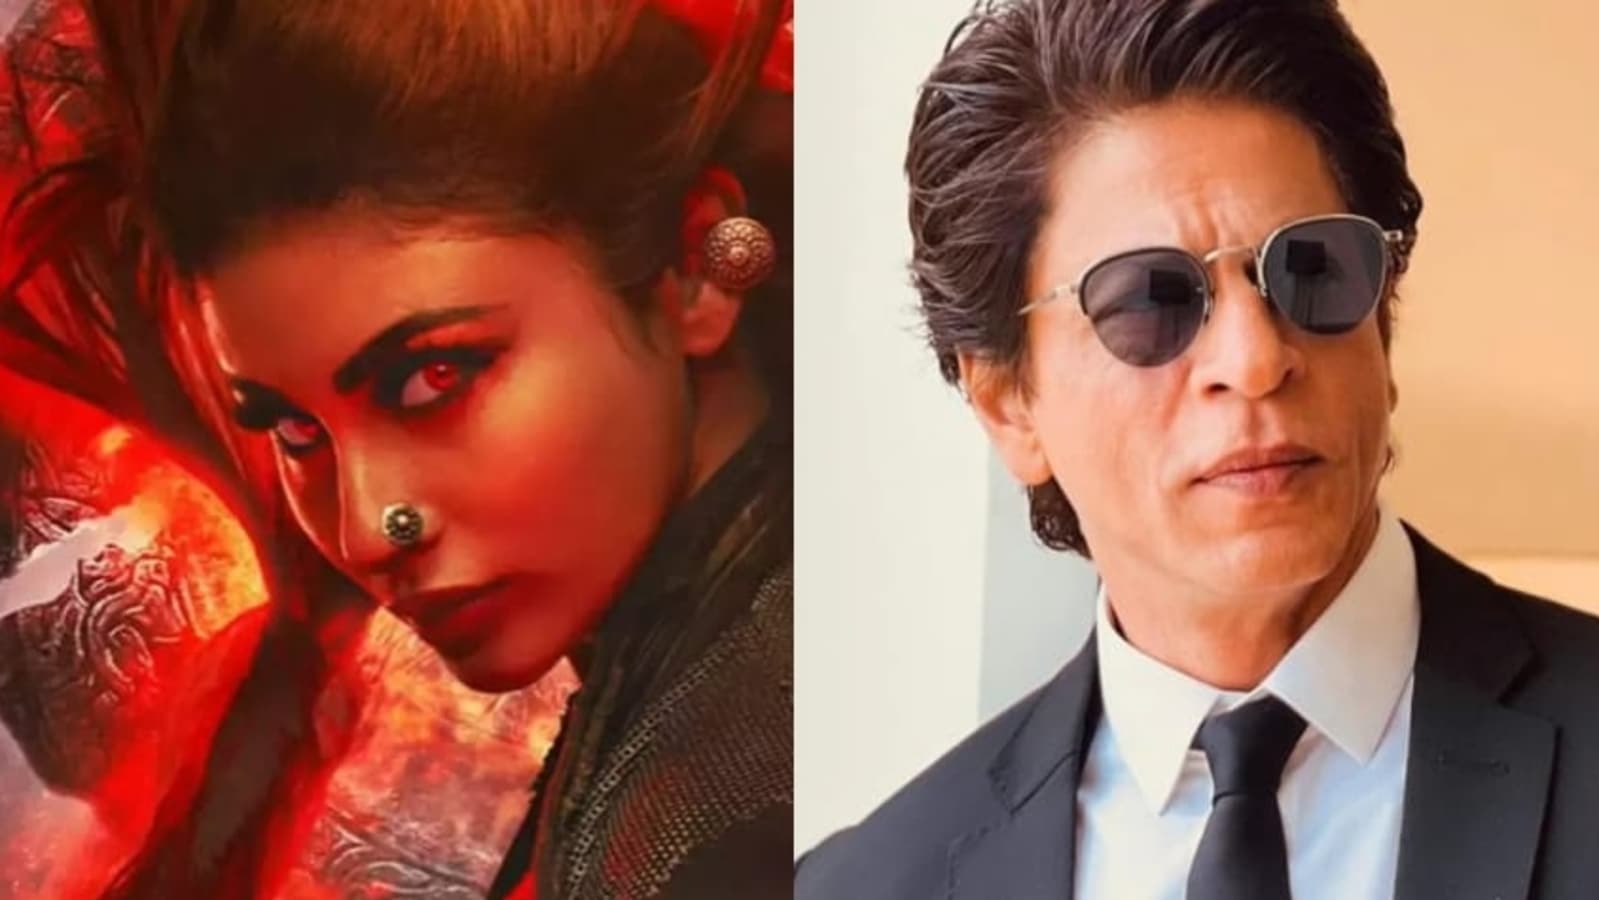 Shah Rukh Khan's cameo in Brahmastra confirmed by Mouni Roy ...